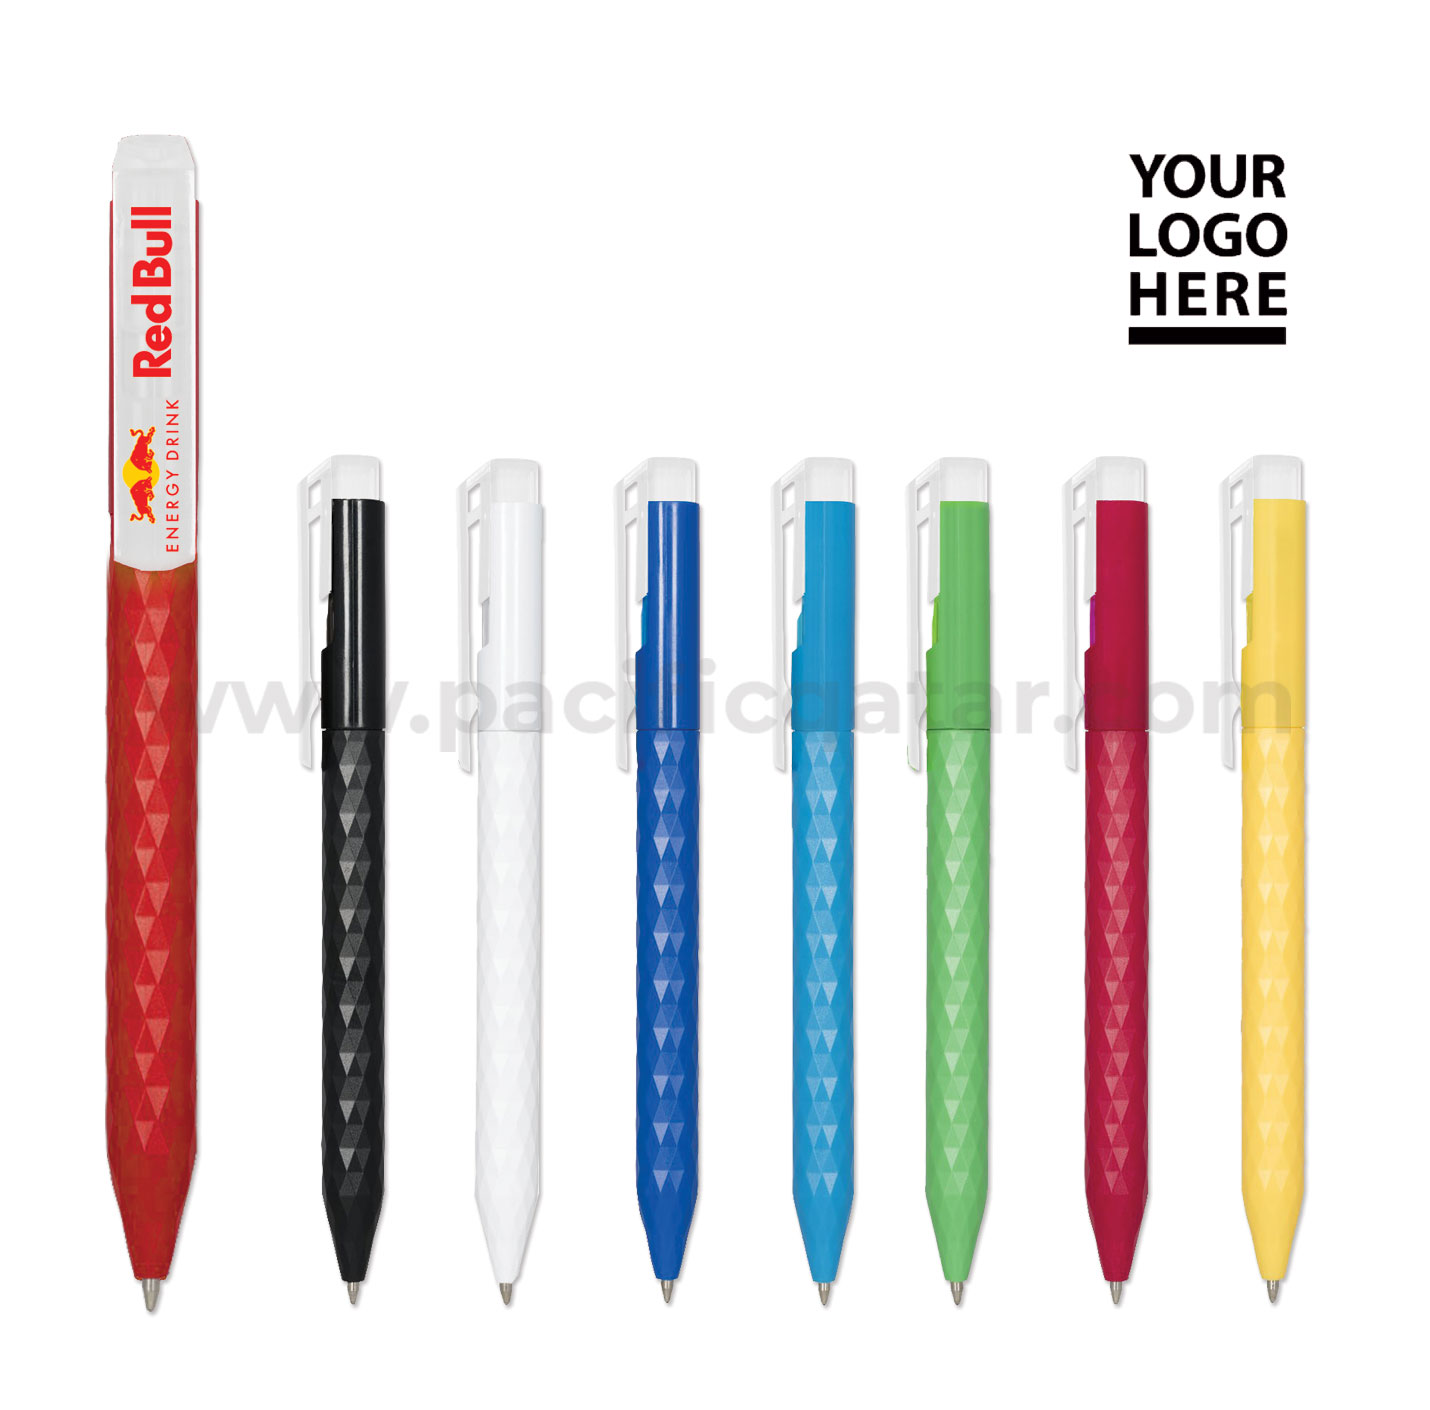 Plastic pen with logo and various color